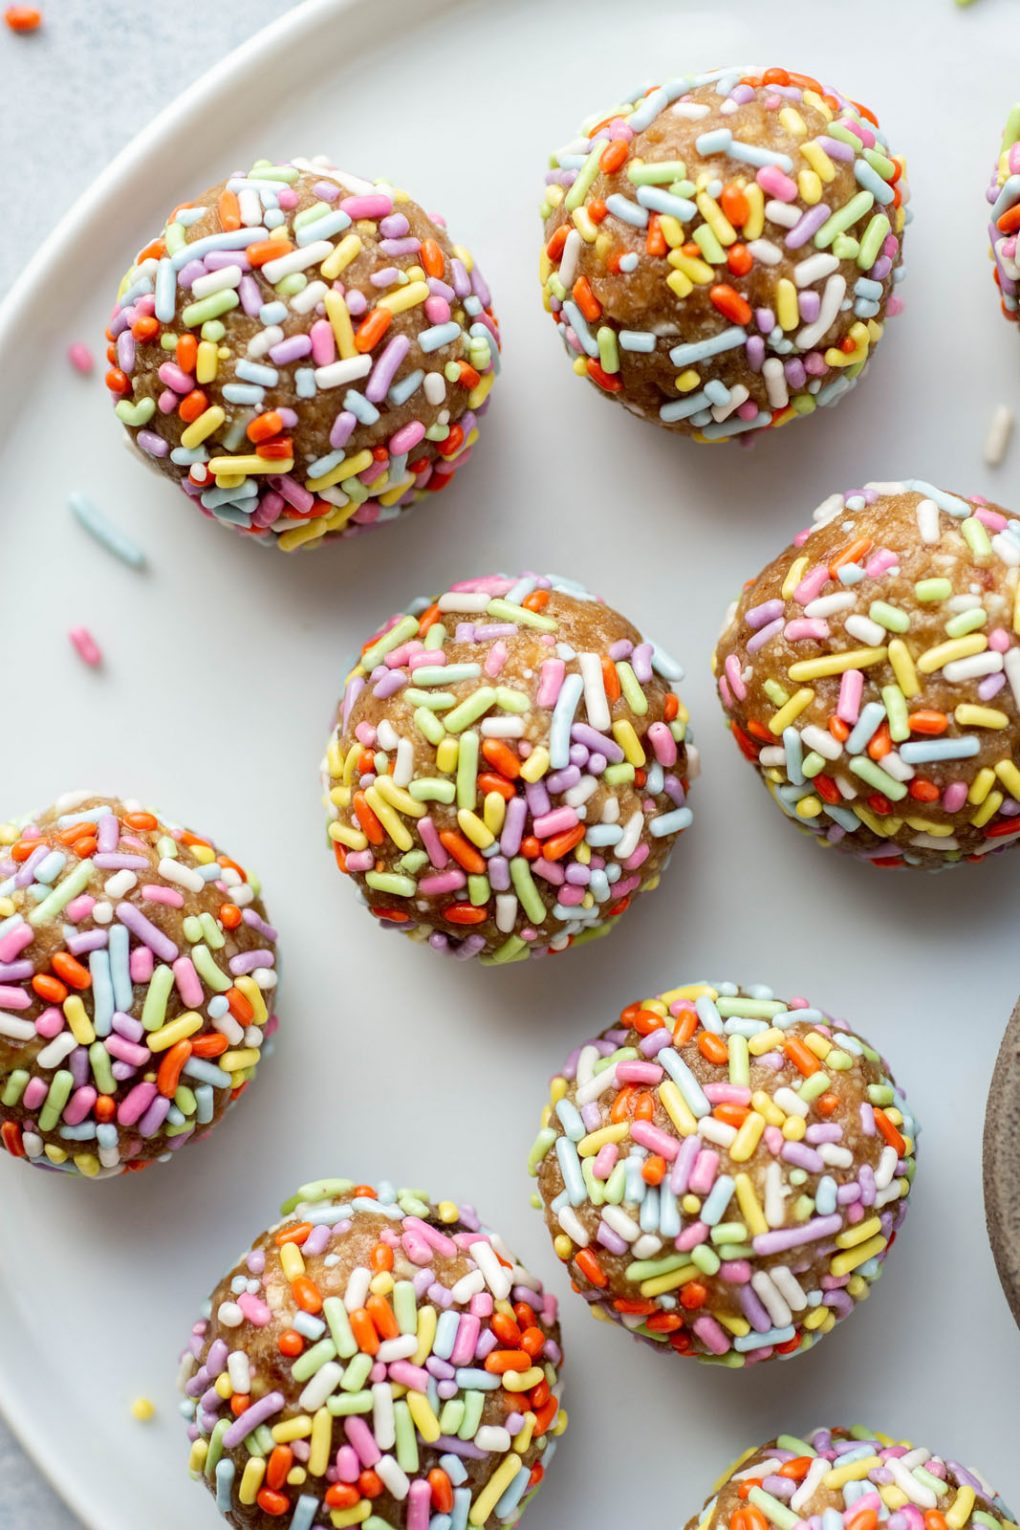 Overhead shot of energy bites coated in rainbow sprinkles on a white plate surrounded by a few scattered sprinkles.